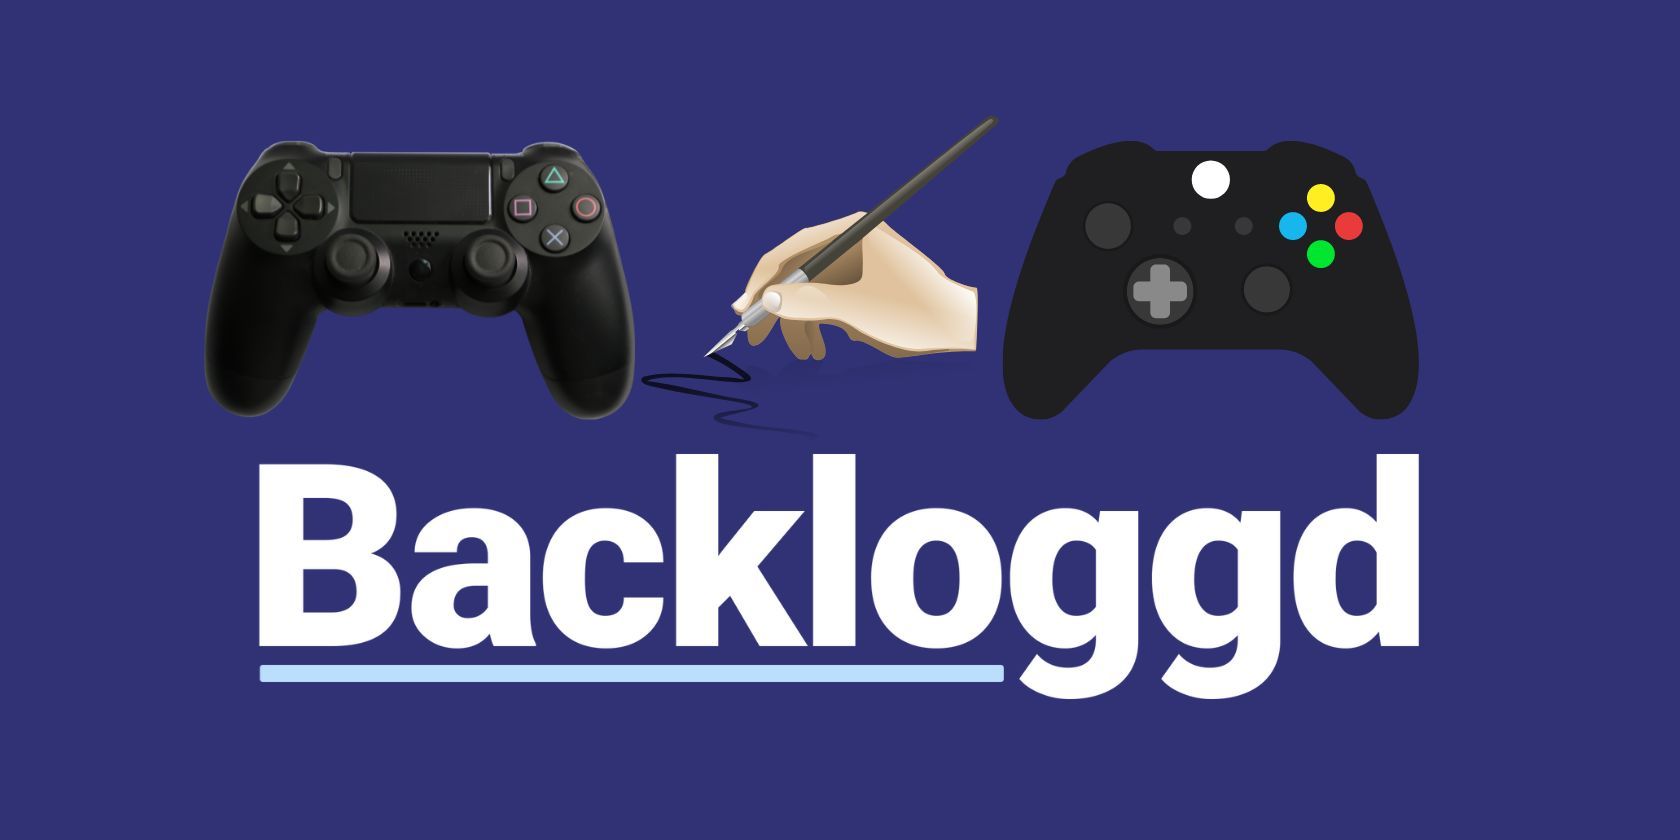 A PS4 Xbox controller with a writing cartoon vector in the middle and the Backloggd logo underneath on a blue background